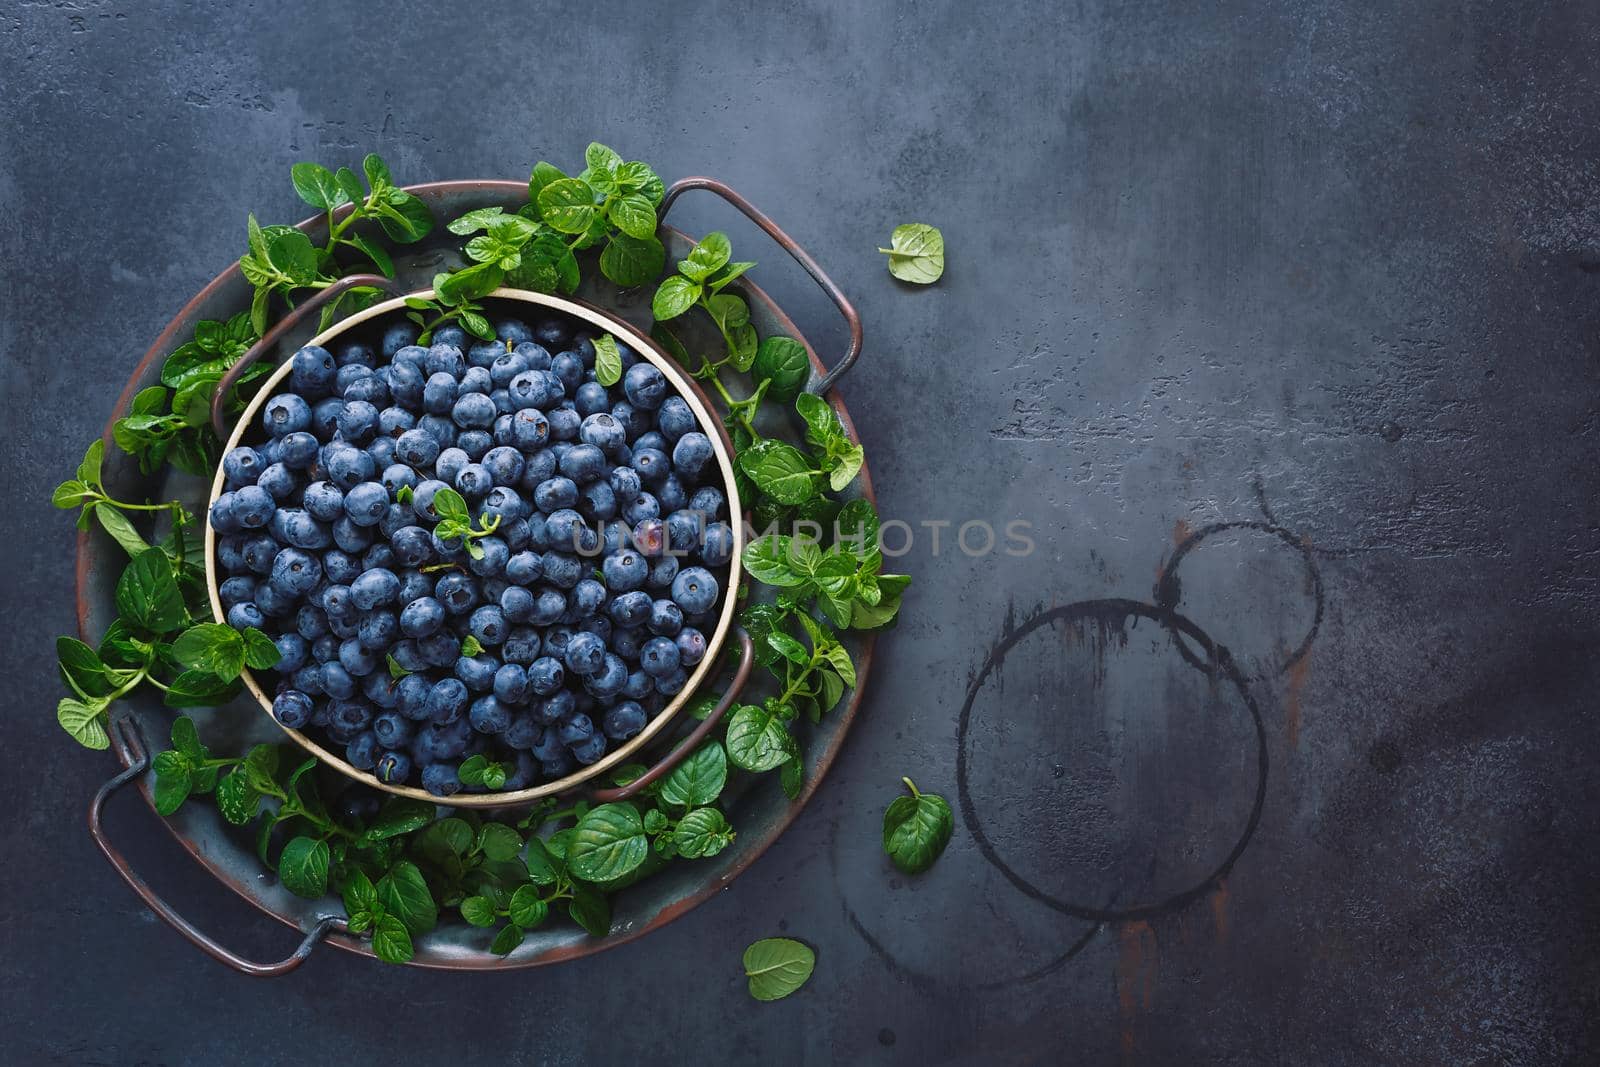 Plate of blueberries. Plate full of  ripe blueberries placed on black  rustic background. Top view, blank space by Slast20